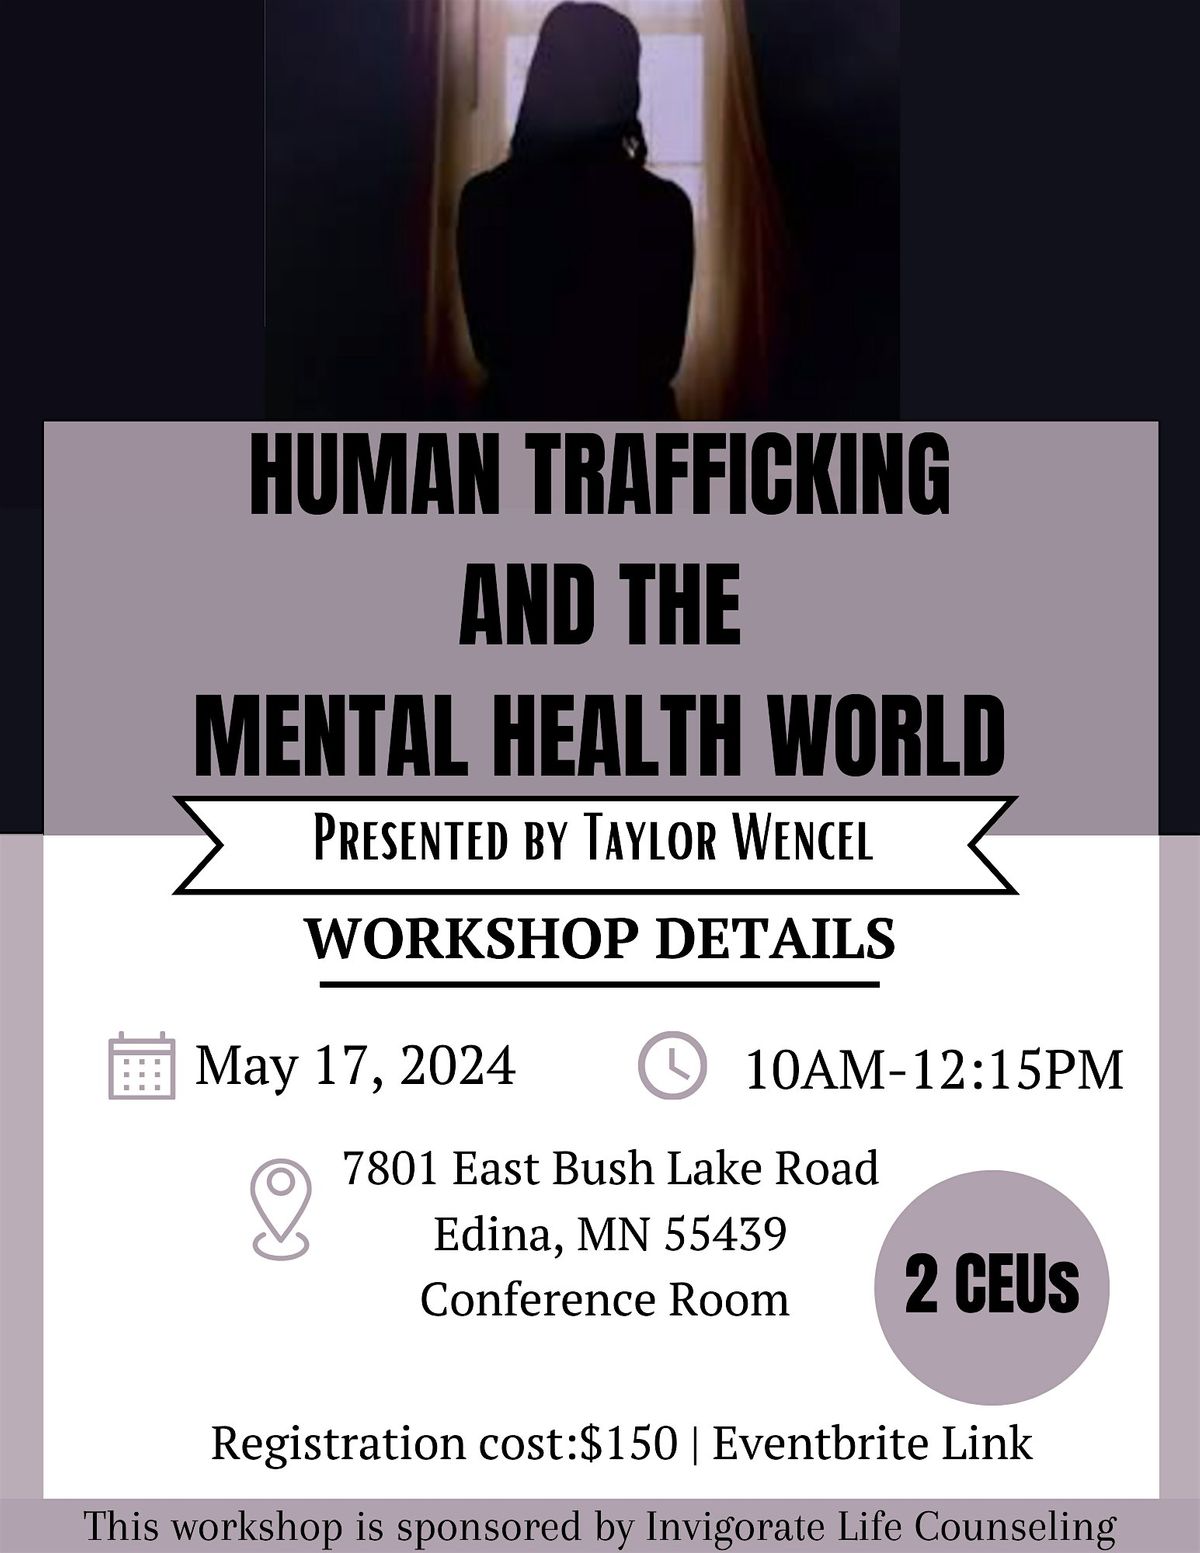 Human Trafficking and the Mental Health World